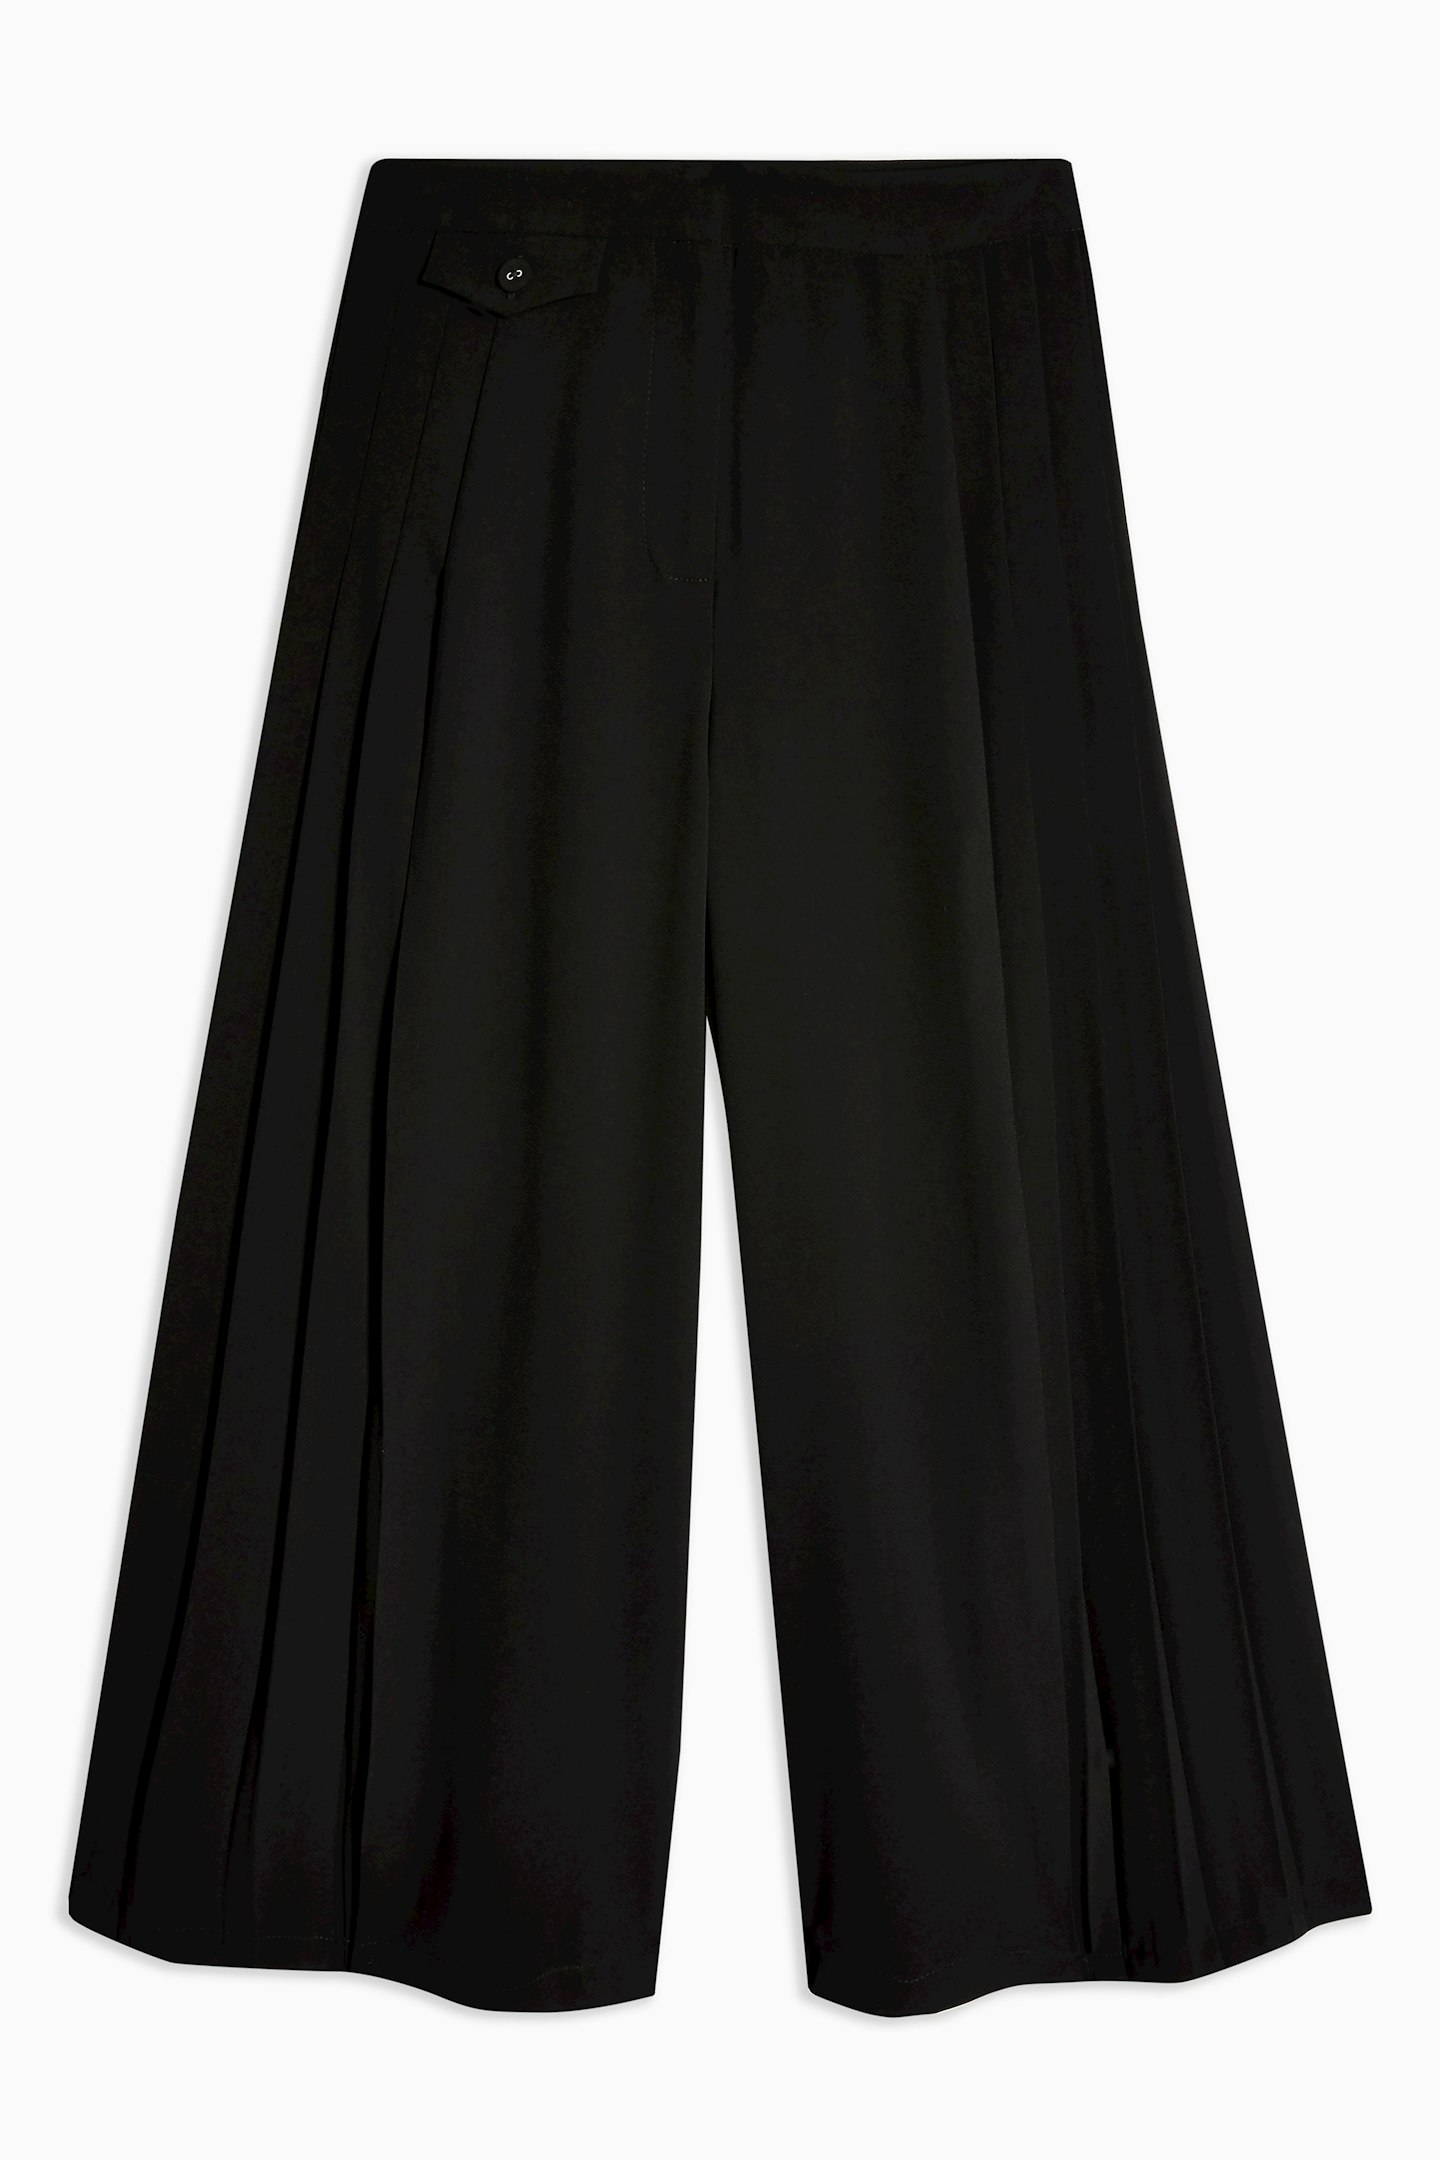 Topshop, Black Cropped Trousers, £42